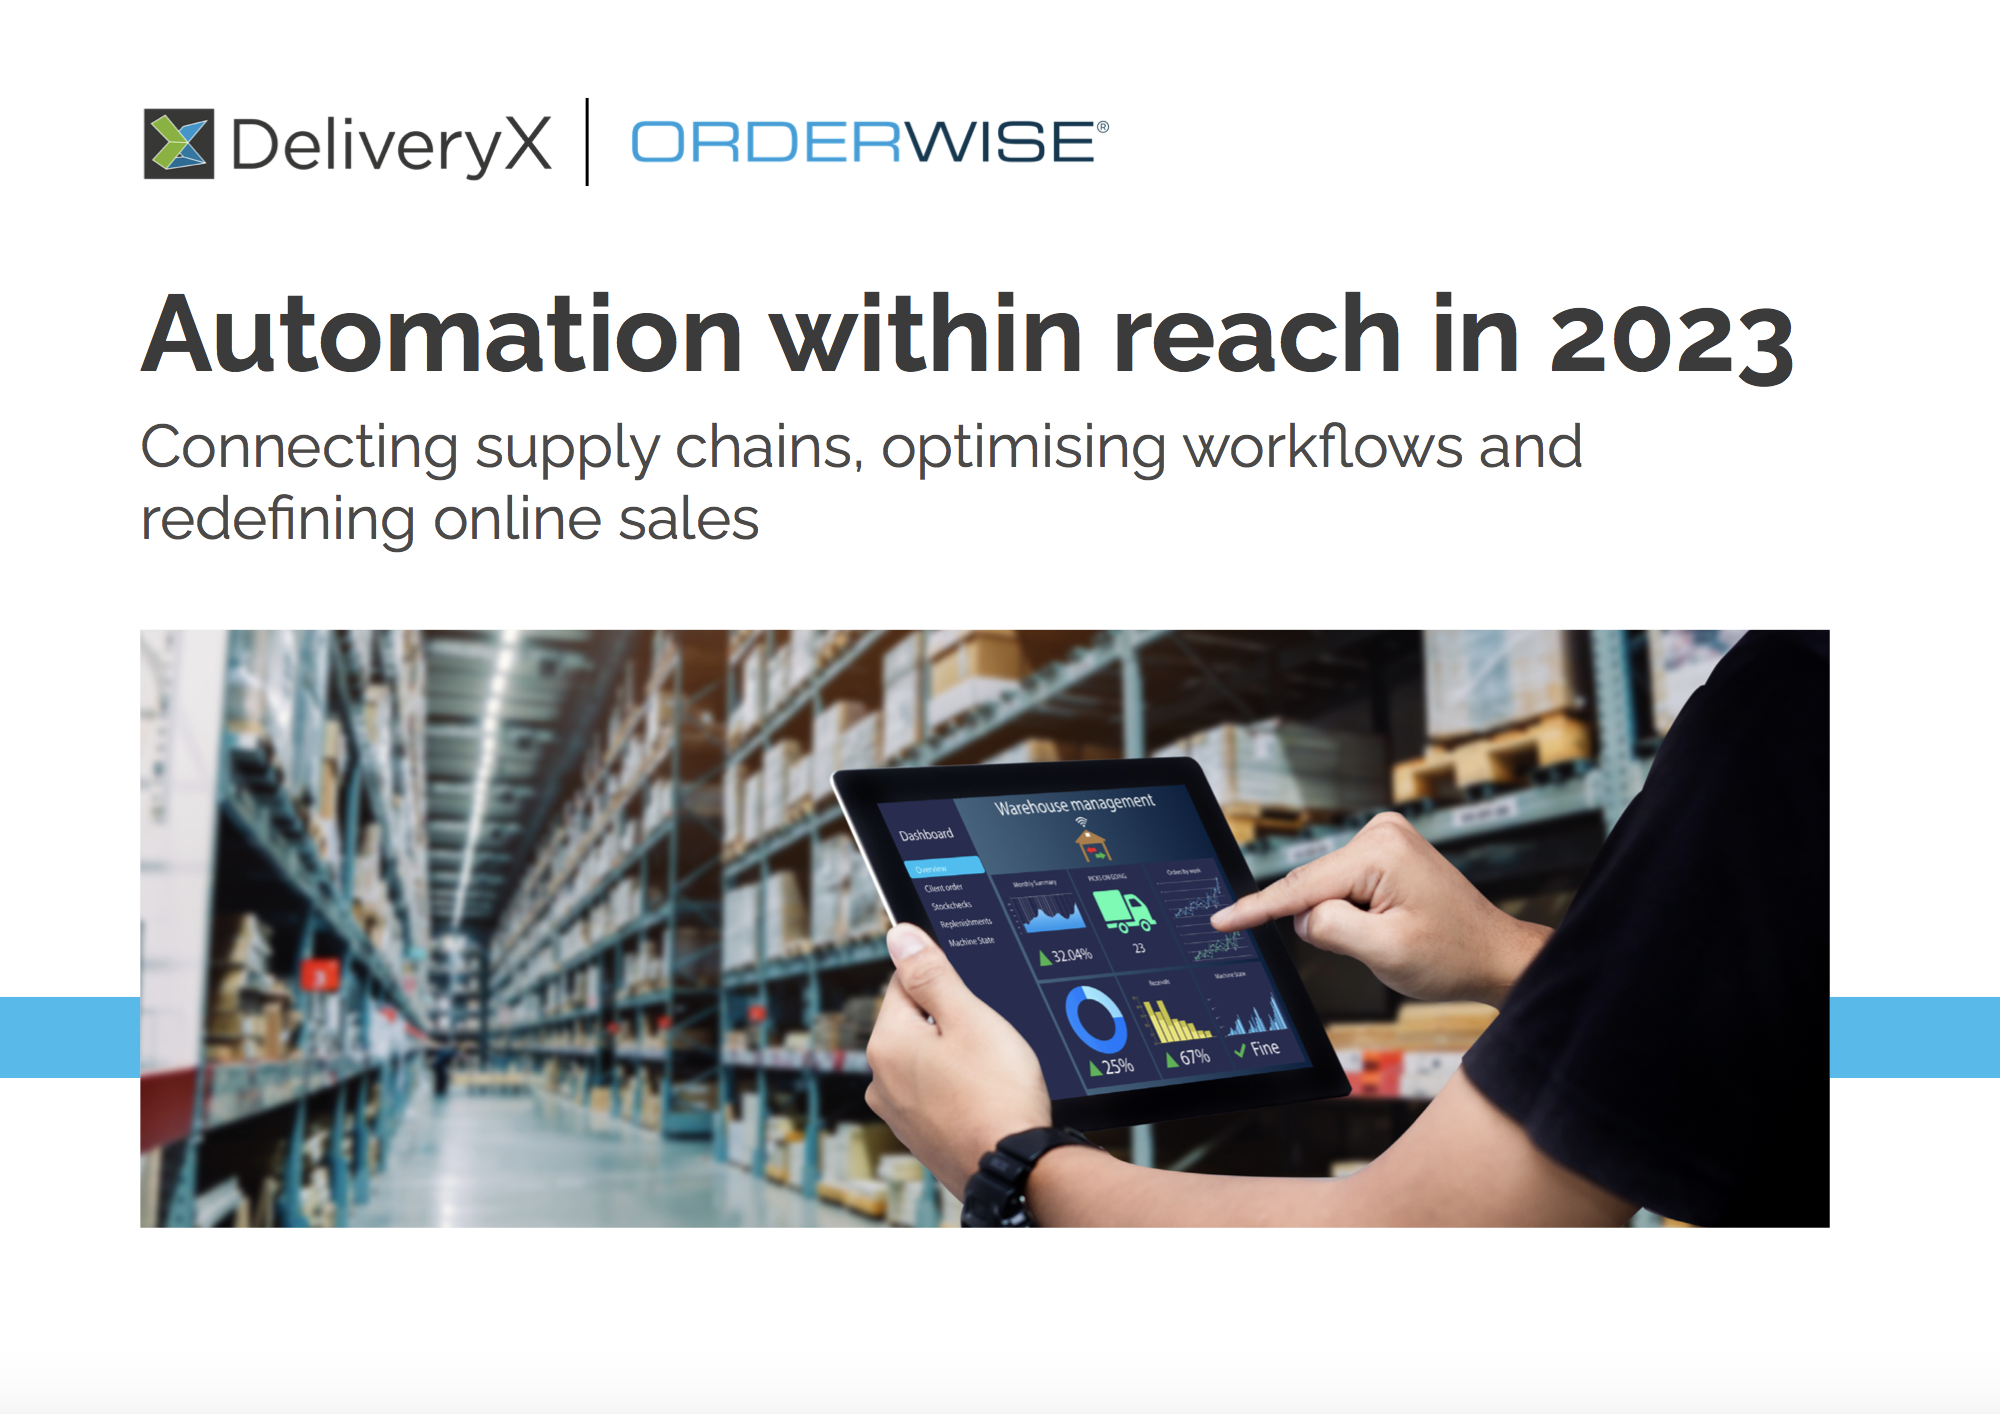 Orderwise: Automation within reach in 2023